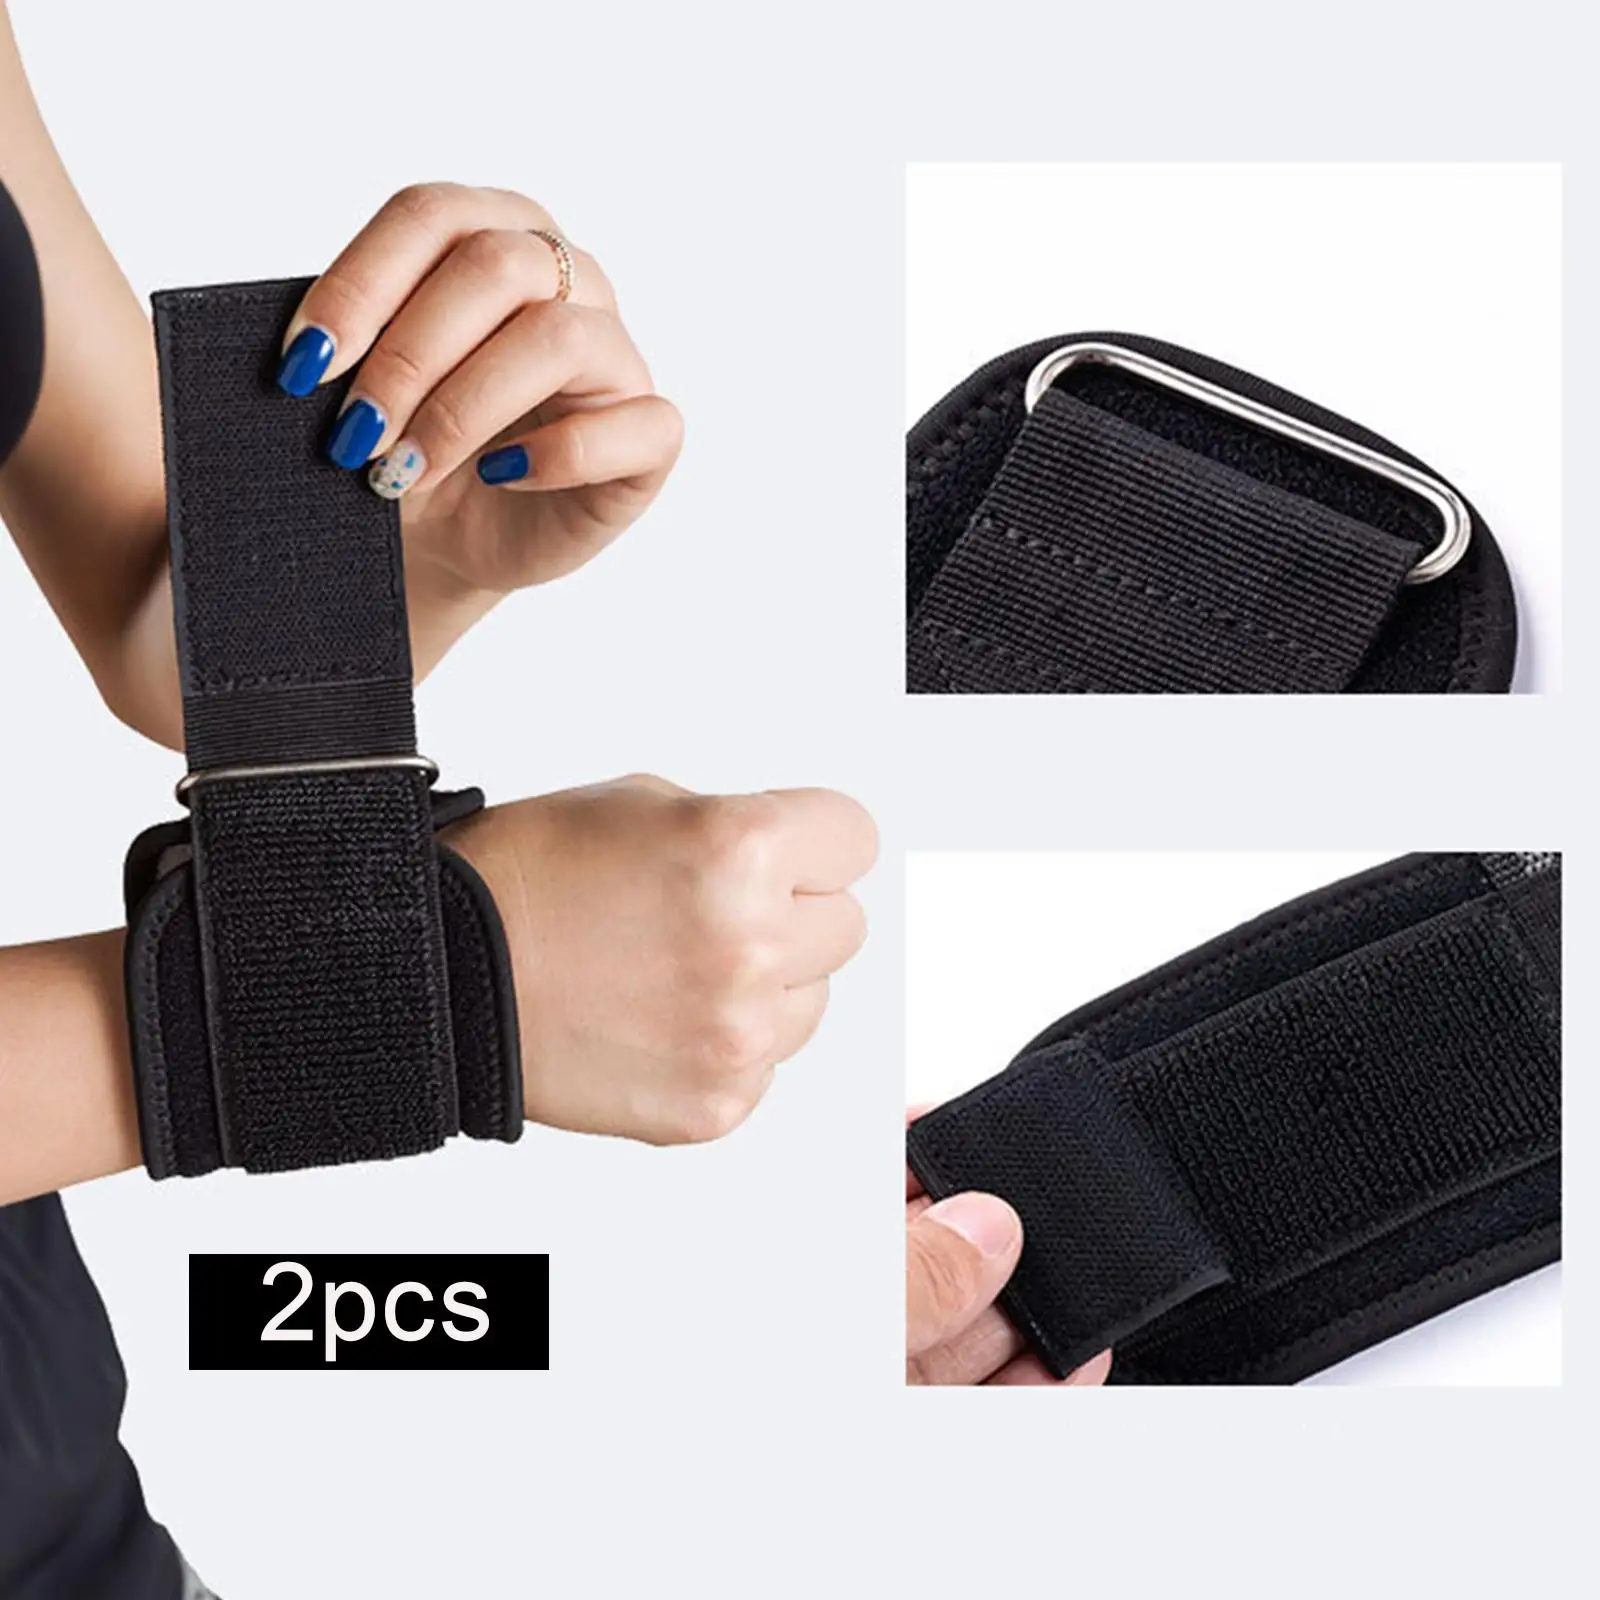 2Pcs Weight Lifting Straps Wristband Protective Gear Bench Press Gym